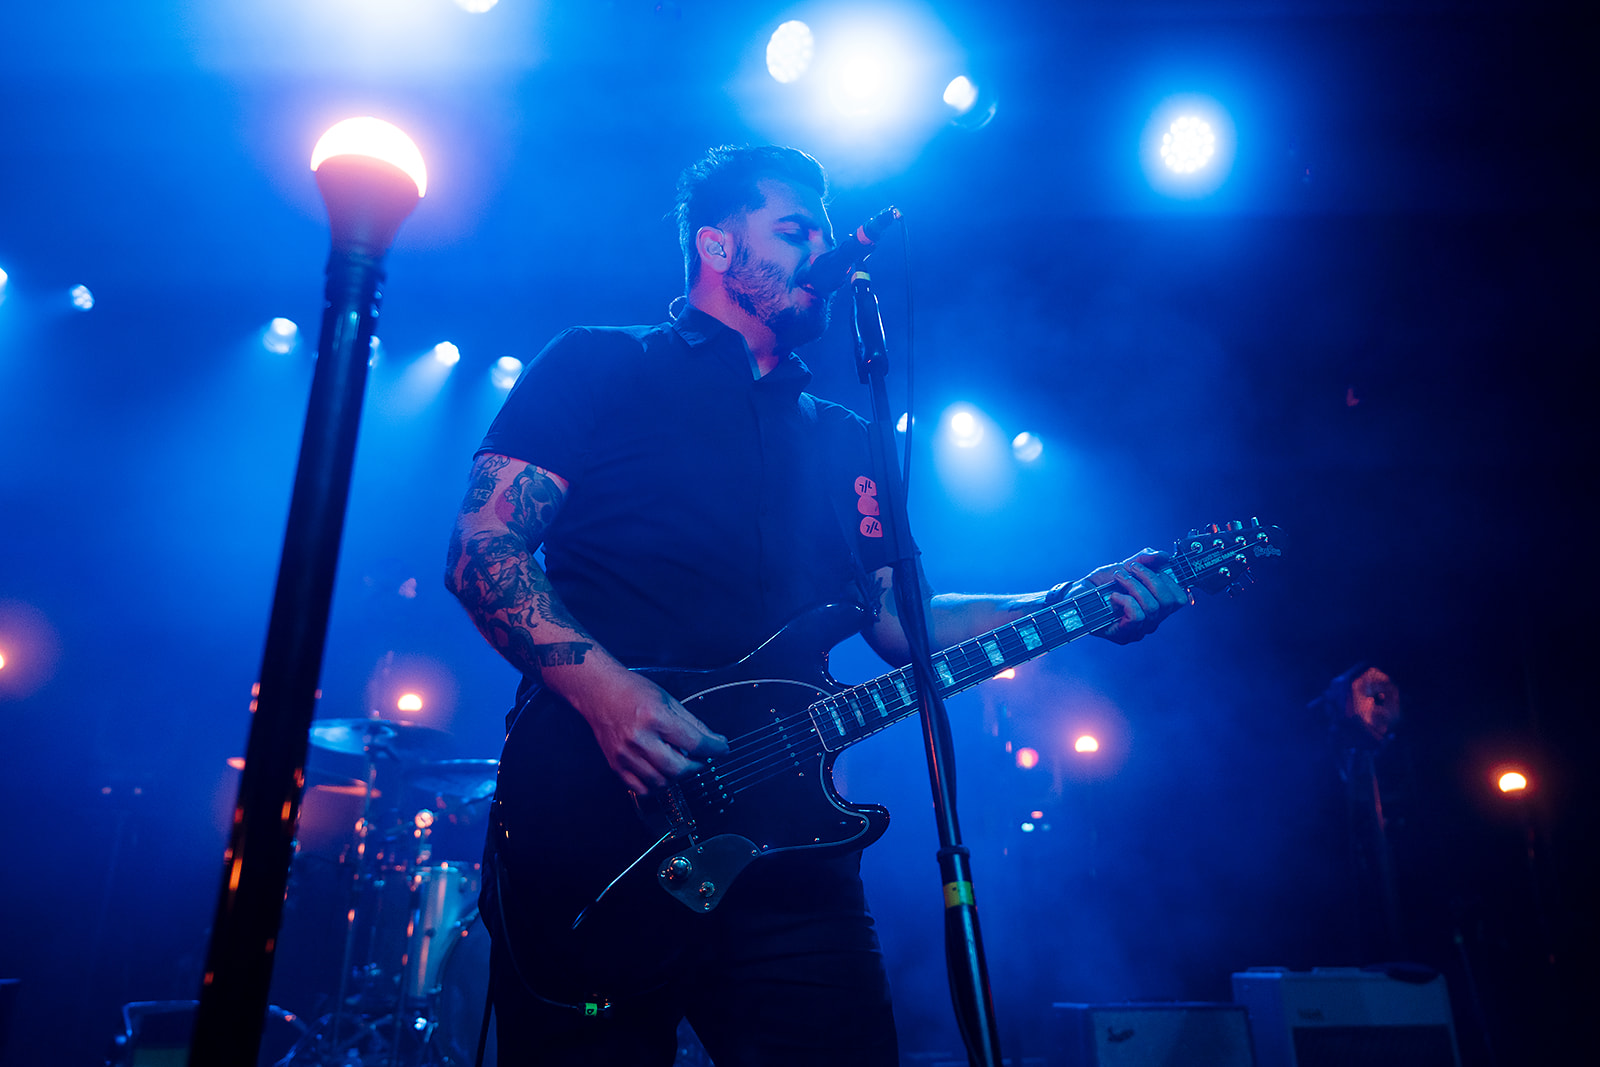 Dustin Kensrue of Thrice live at the showbox during their 20th Anniversary of Artists In The Ambulance